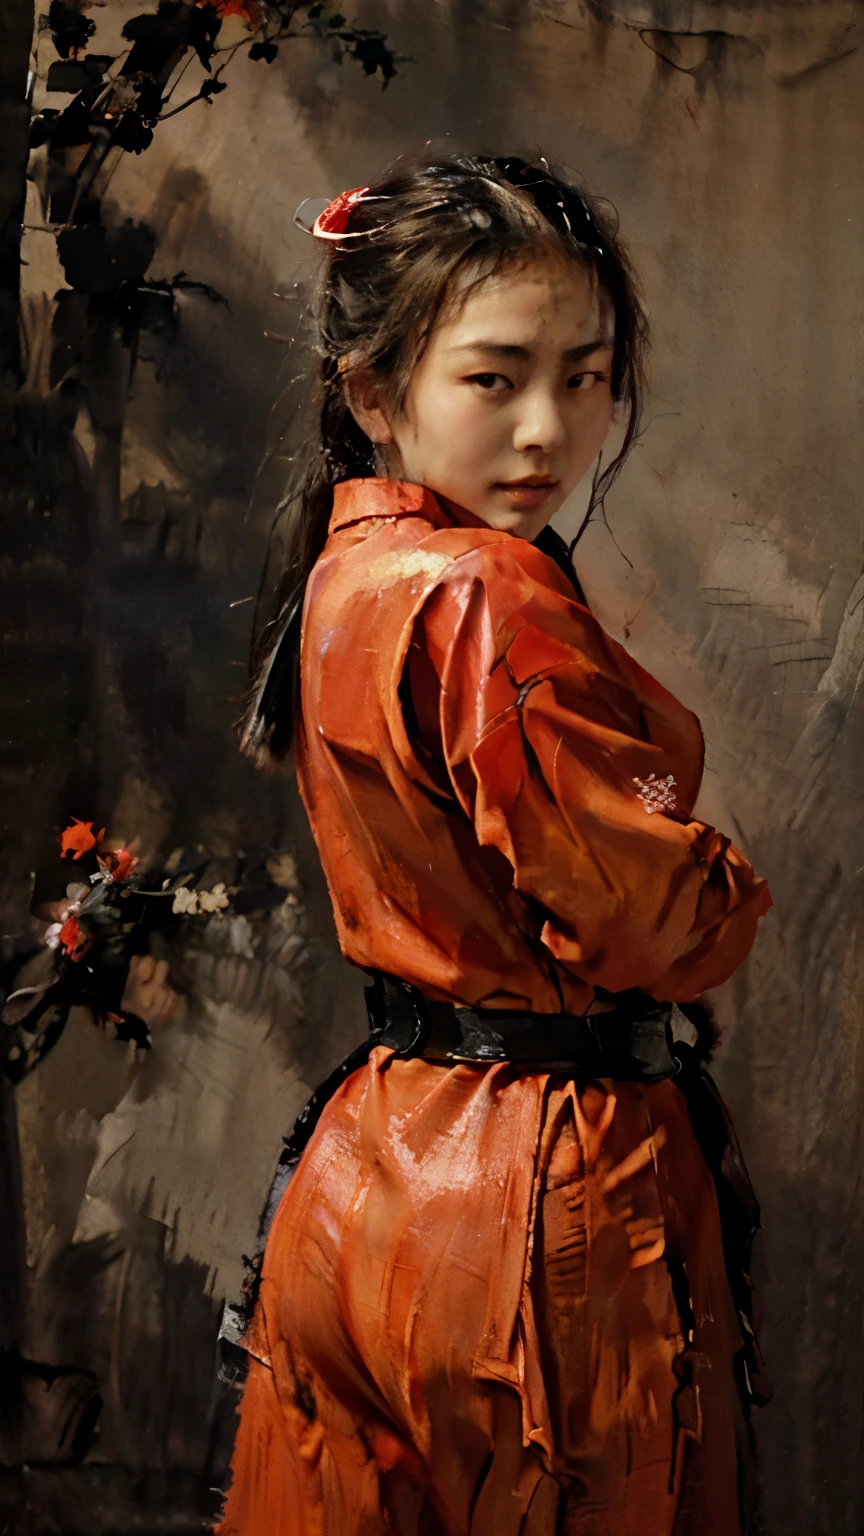 ( classic asian oil painting ) a classic asian oil painting of a sexy asian teenager ninja girl wearing a red ninja uniform, red ninja assassin uniform, action ninja pose looking at the camera, ((sexy:1.0)), ((red shinobi uniform:1.0)) ((classic asian oil painting:1.0))